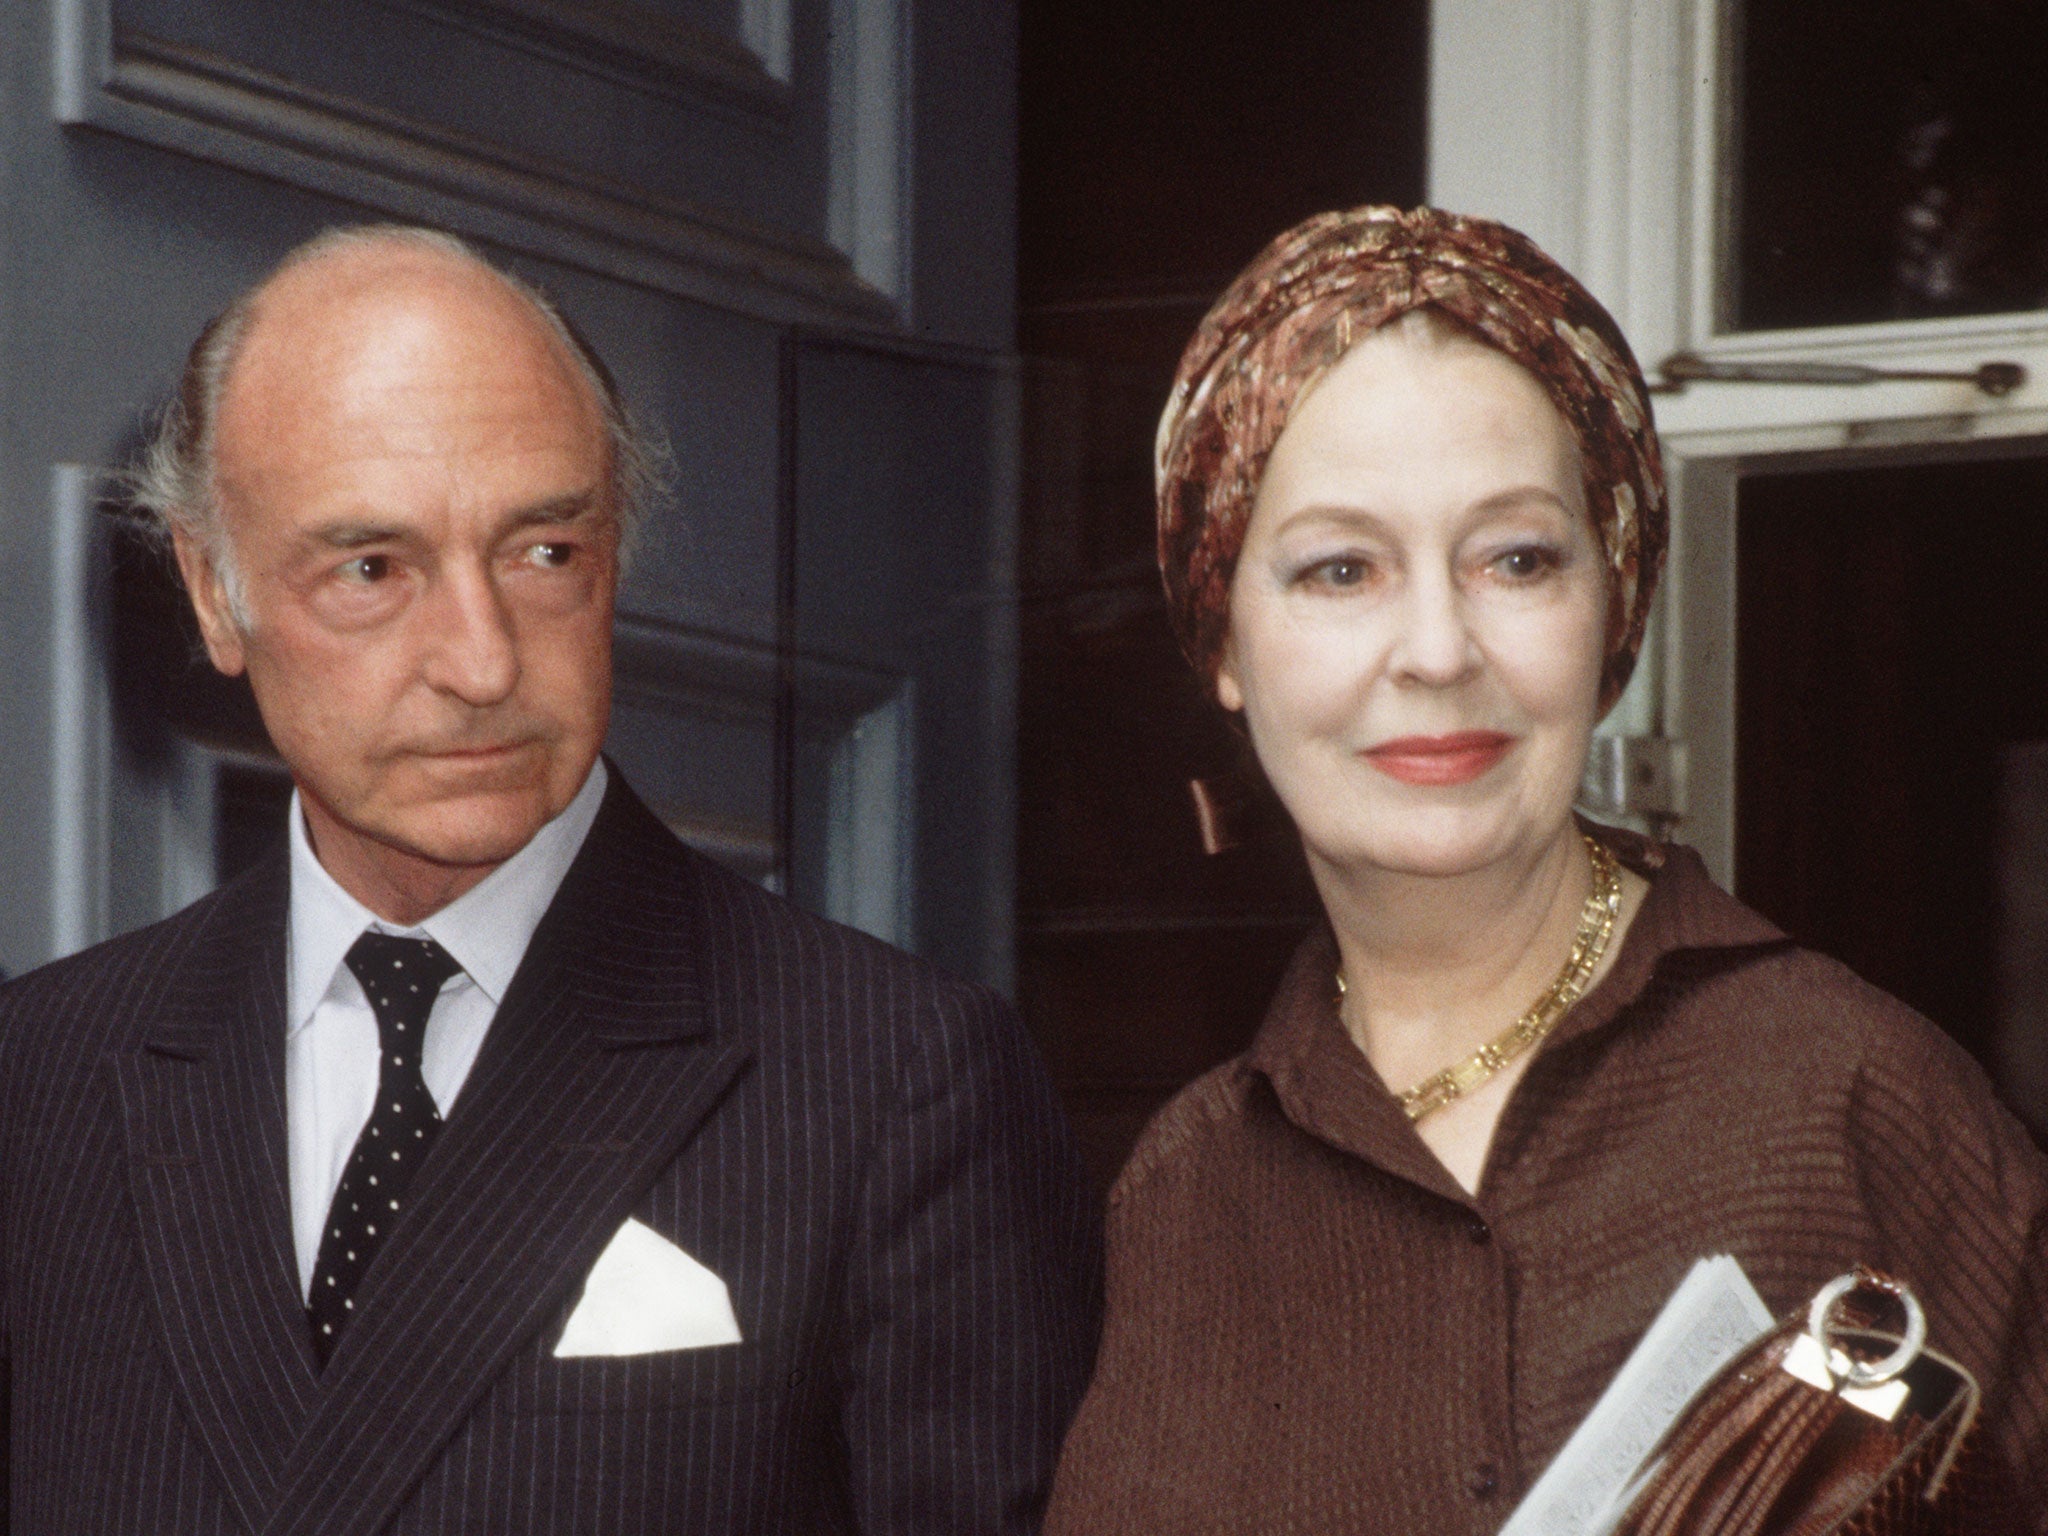 The Former Minister of War John Profumo with his wife, the actress Valerie Hobson, in 1985